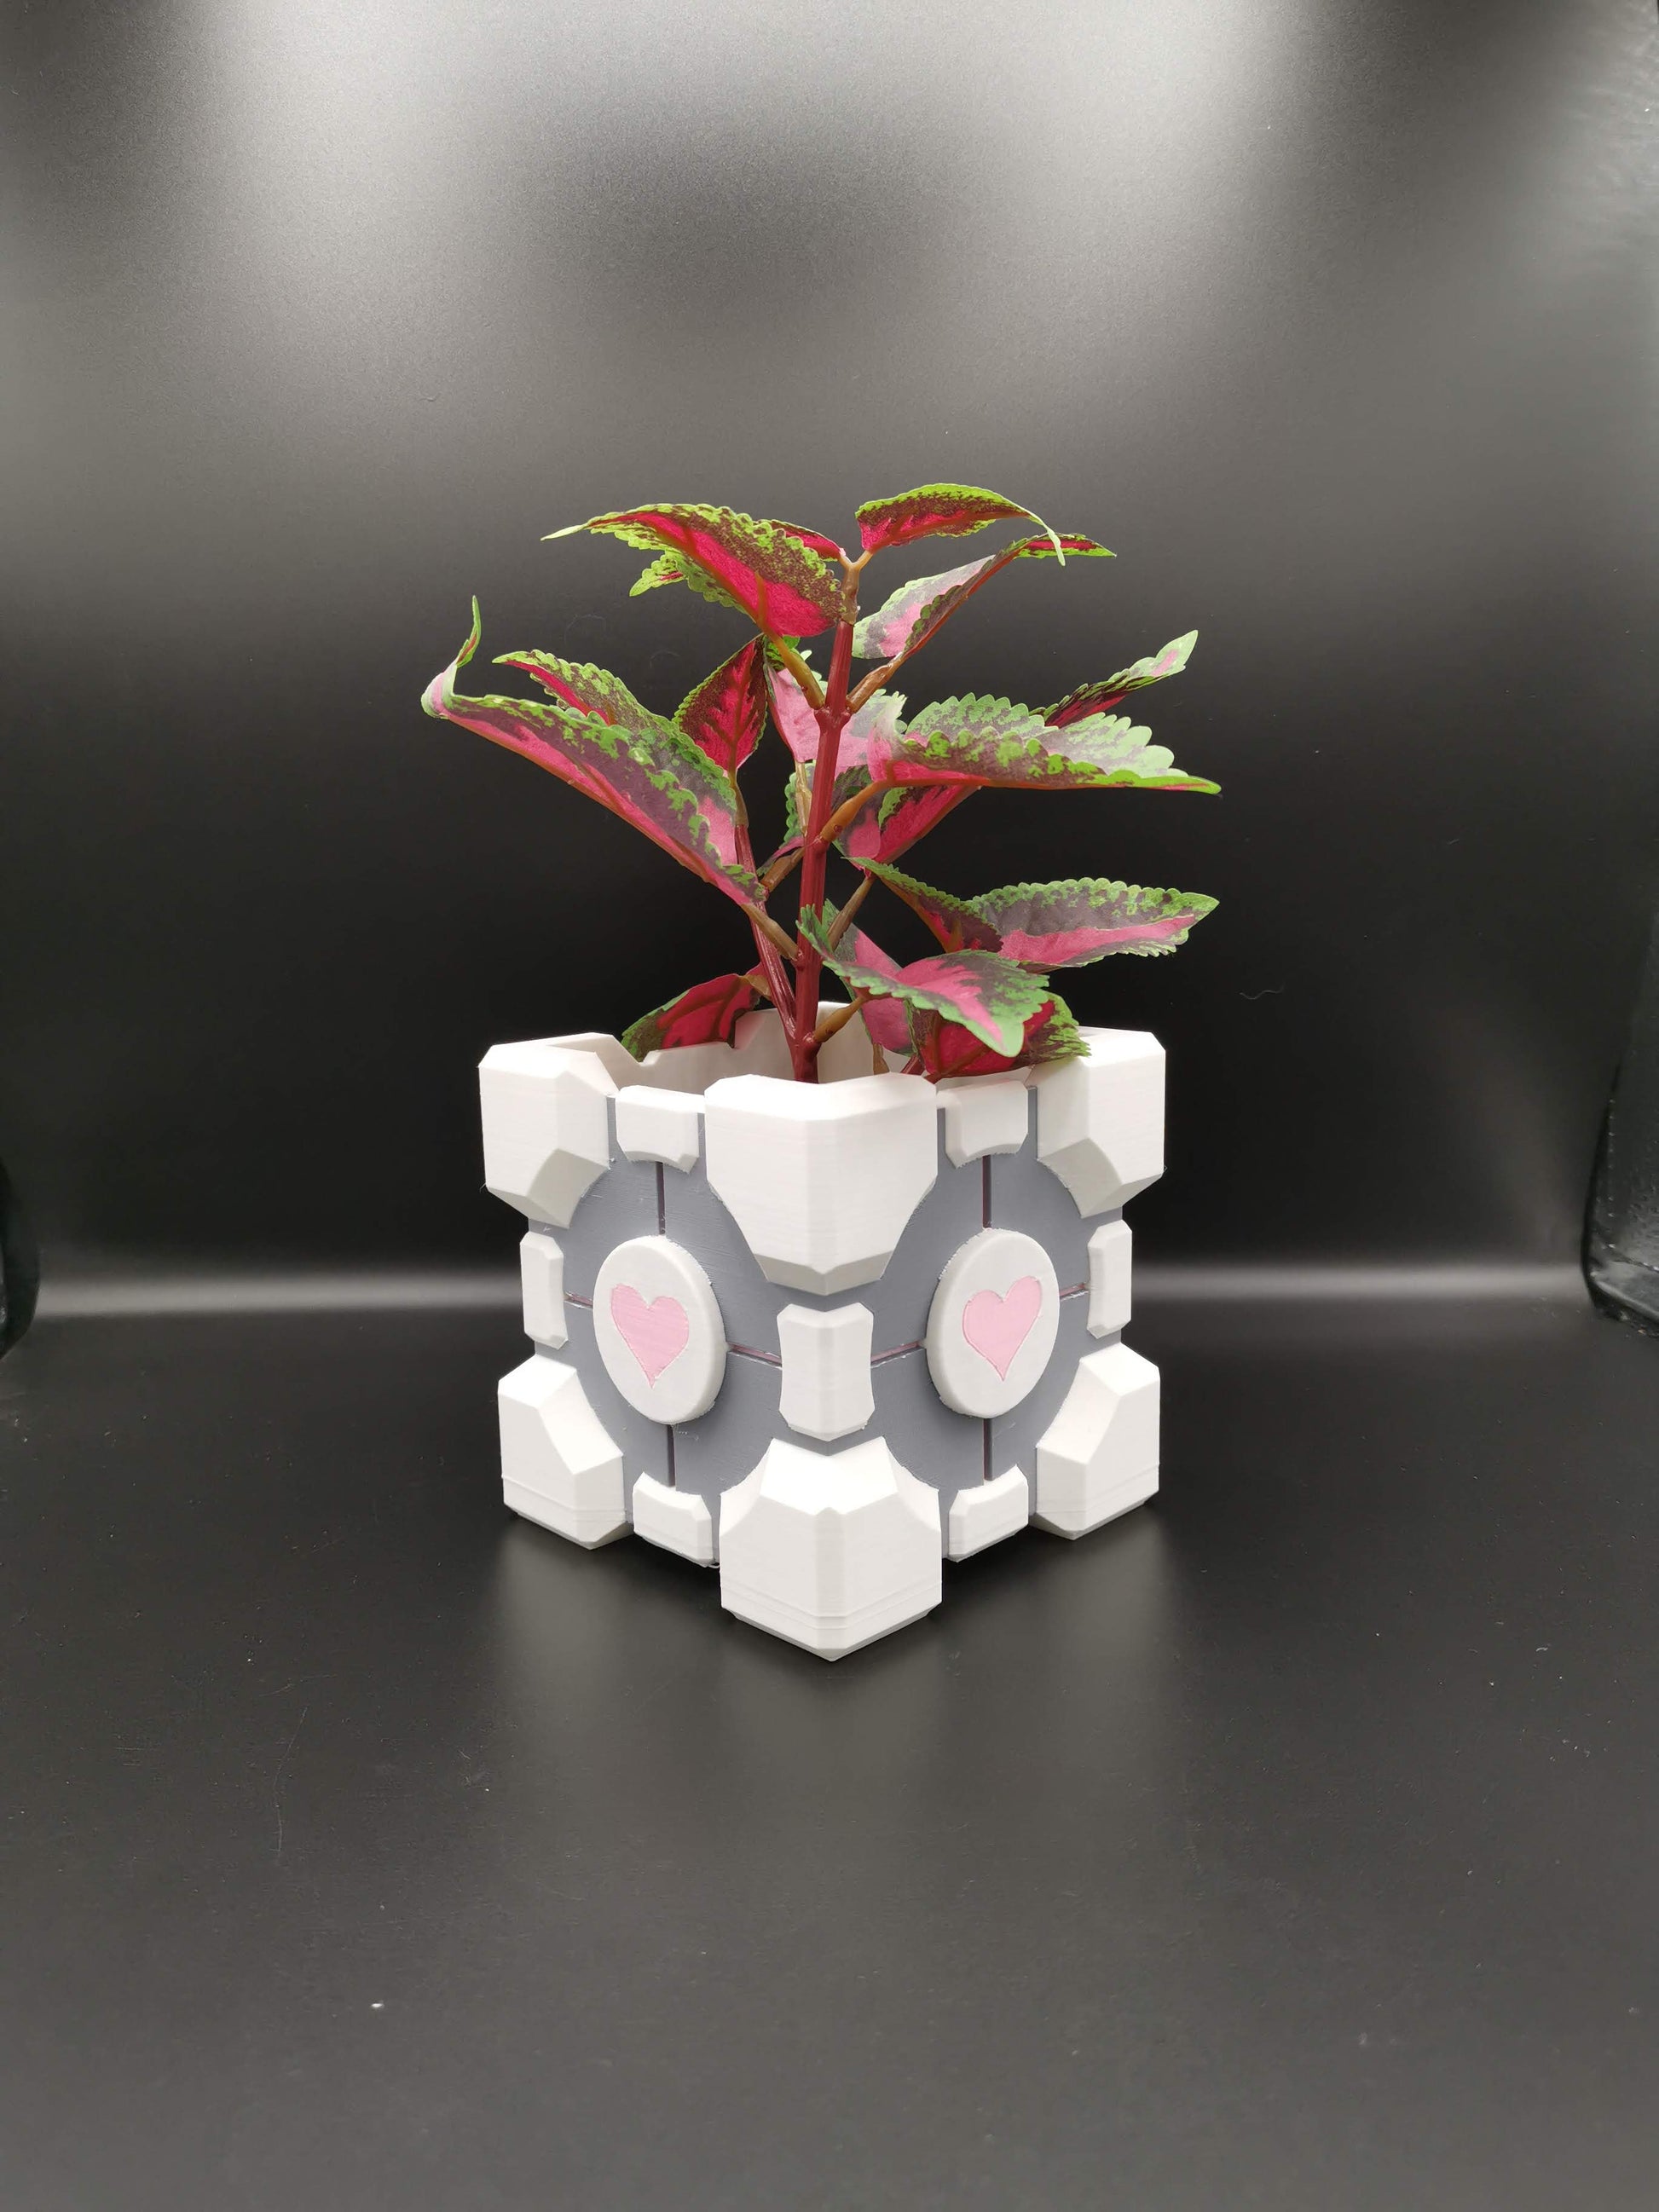 Companion Cube Portal planter from front angle with plant